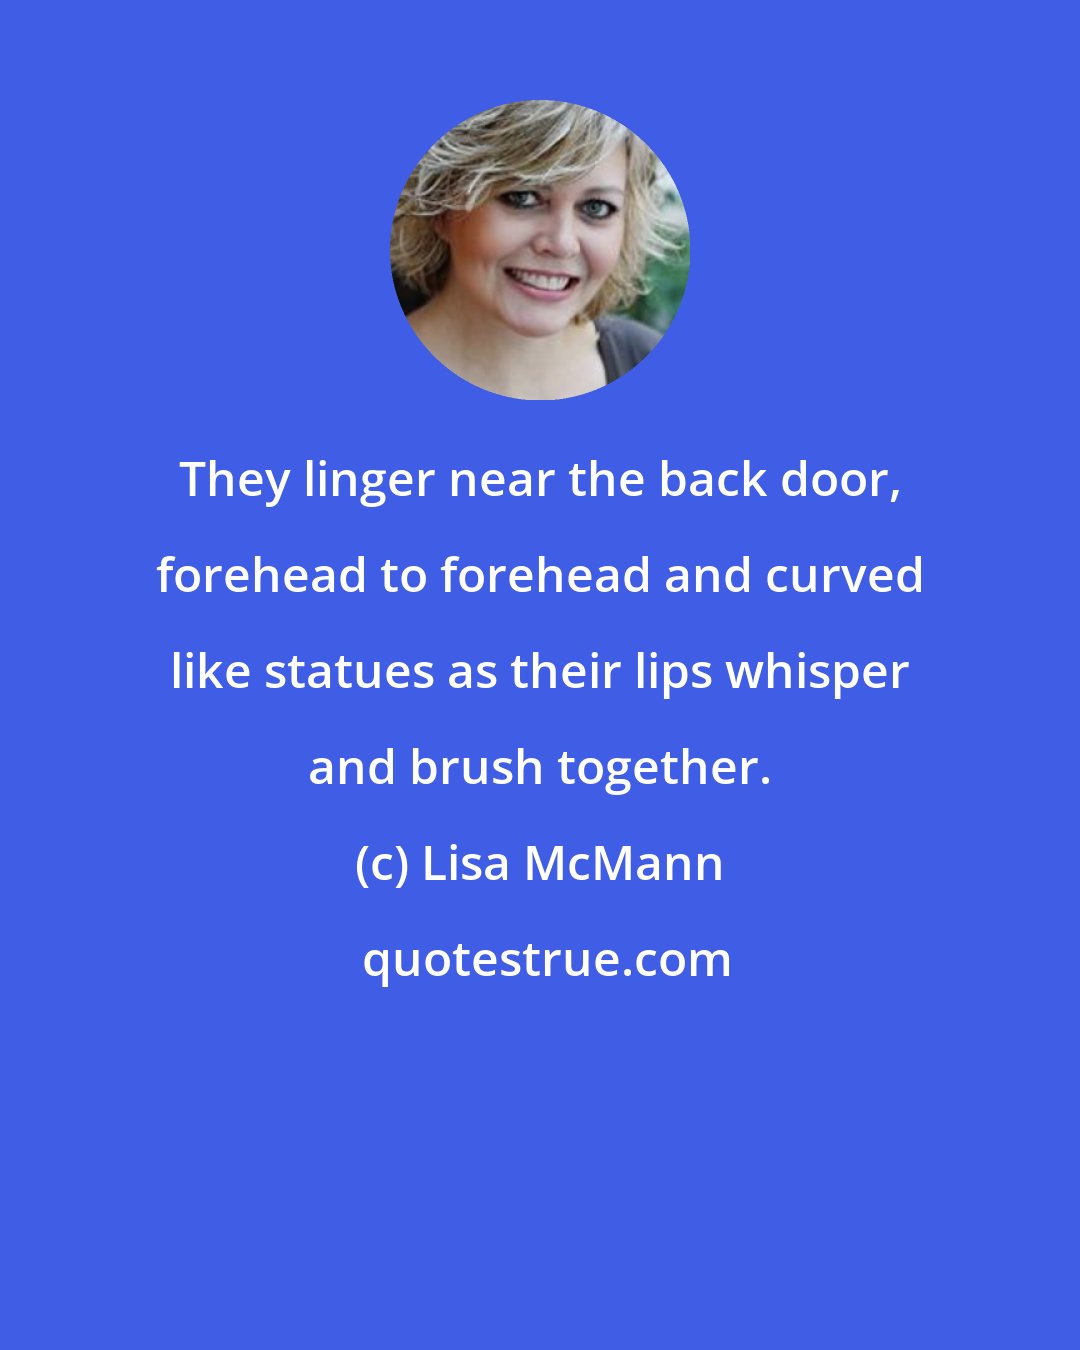 Lisa McMann: They linger near the back door, forehead to forehead and curved like statues as their lips whisper and brush together.